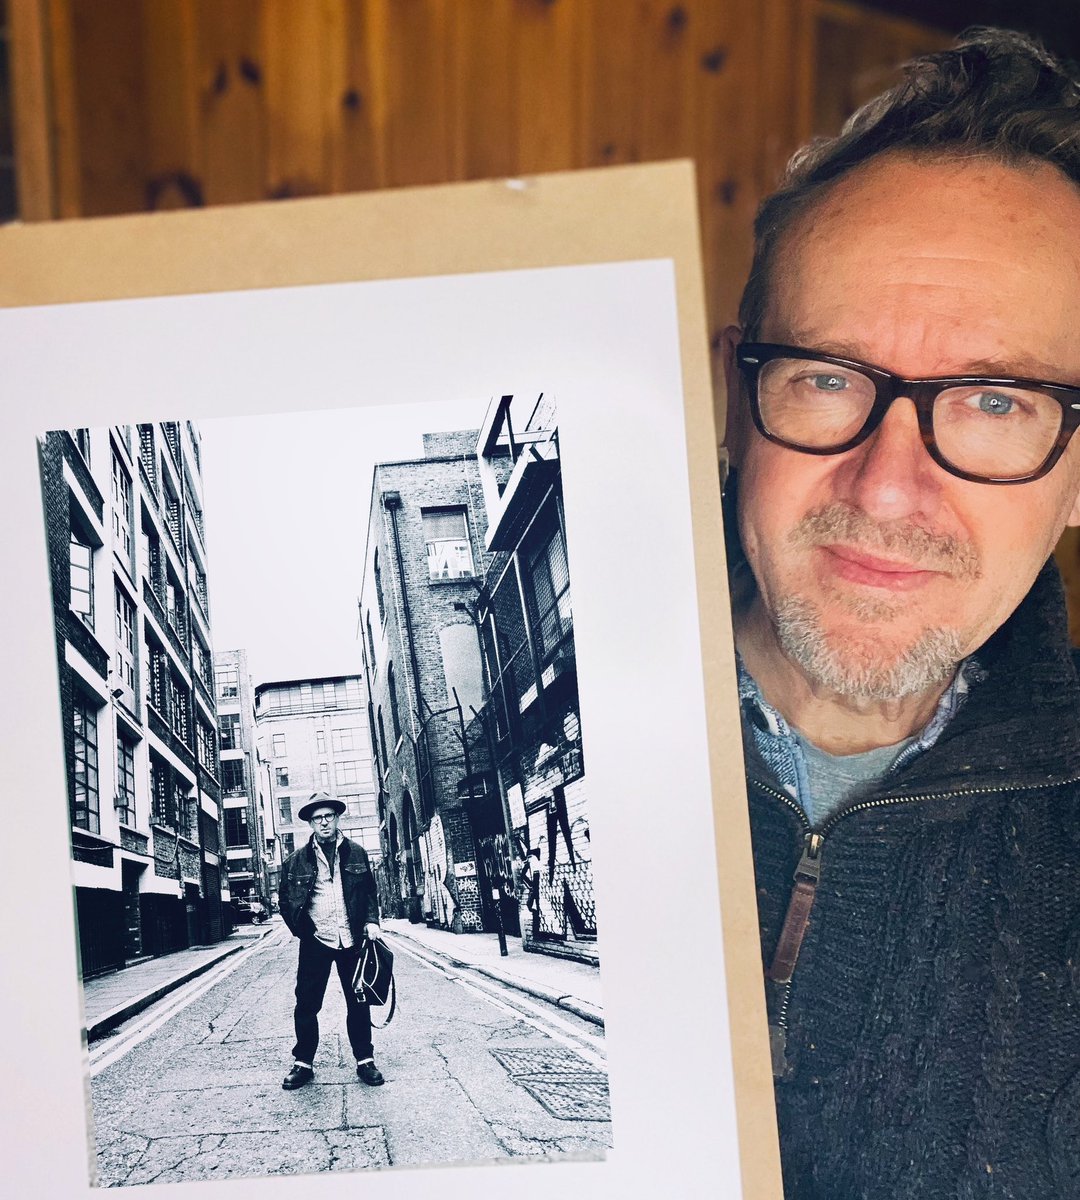 Delighted to share this black and white print of me captured in Spitalfields, London, by an incredibly talented photographer @DavidGilbertWr1 This image highlights the timeless charm of the area. #London #Eastend #spitafields #Hoxton #BlackAndWhitePhotography #ArtThroughLens